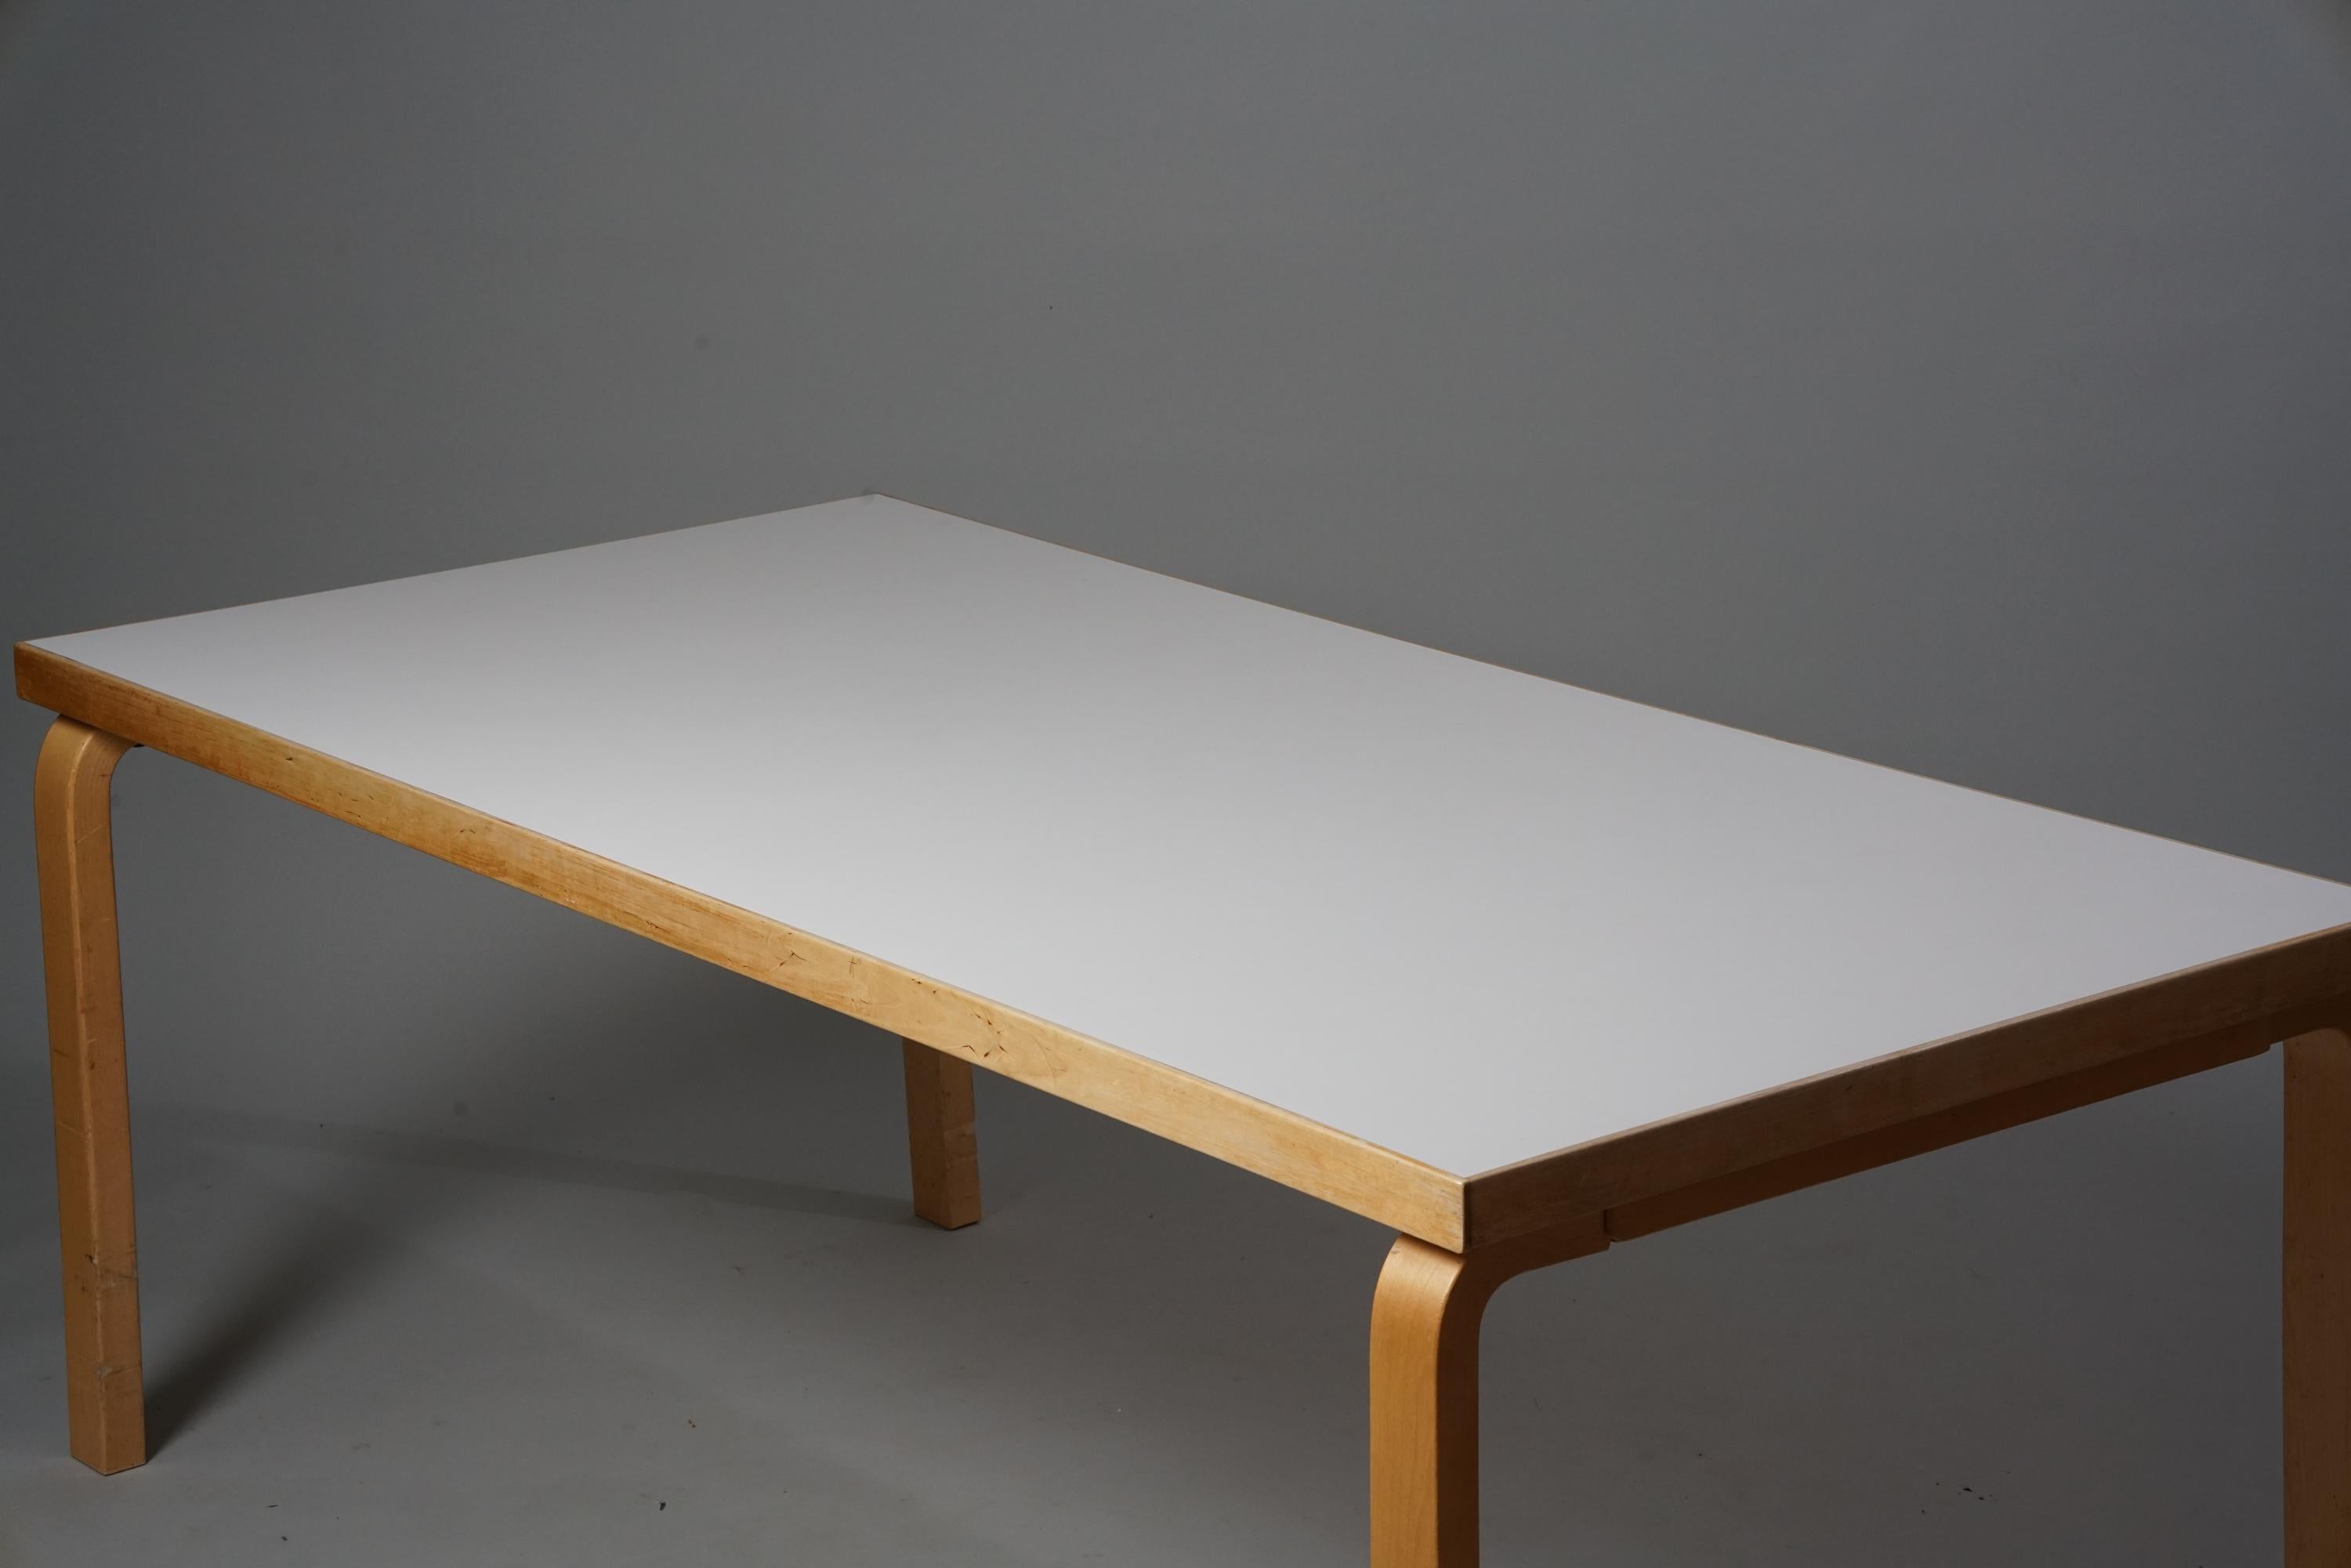 Dining room table, designed by Alvar Aalto, manufactured by Oy Huonekalu- ja Rakennustyötehdas Ab, 1950s. Birch with linoleum table top. Good vintage condition, patina on the legs consistent with age and use. 

Alvar Aalto (1898-1976) is probably